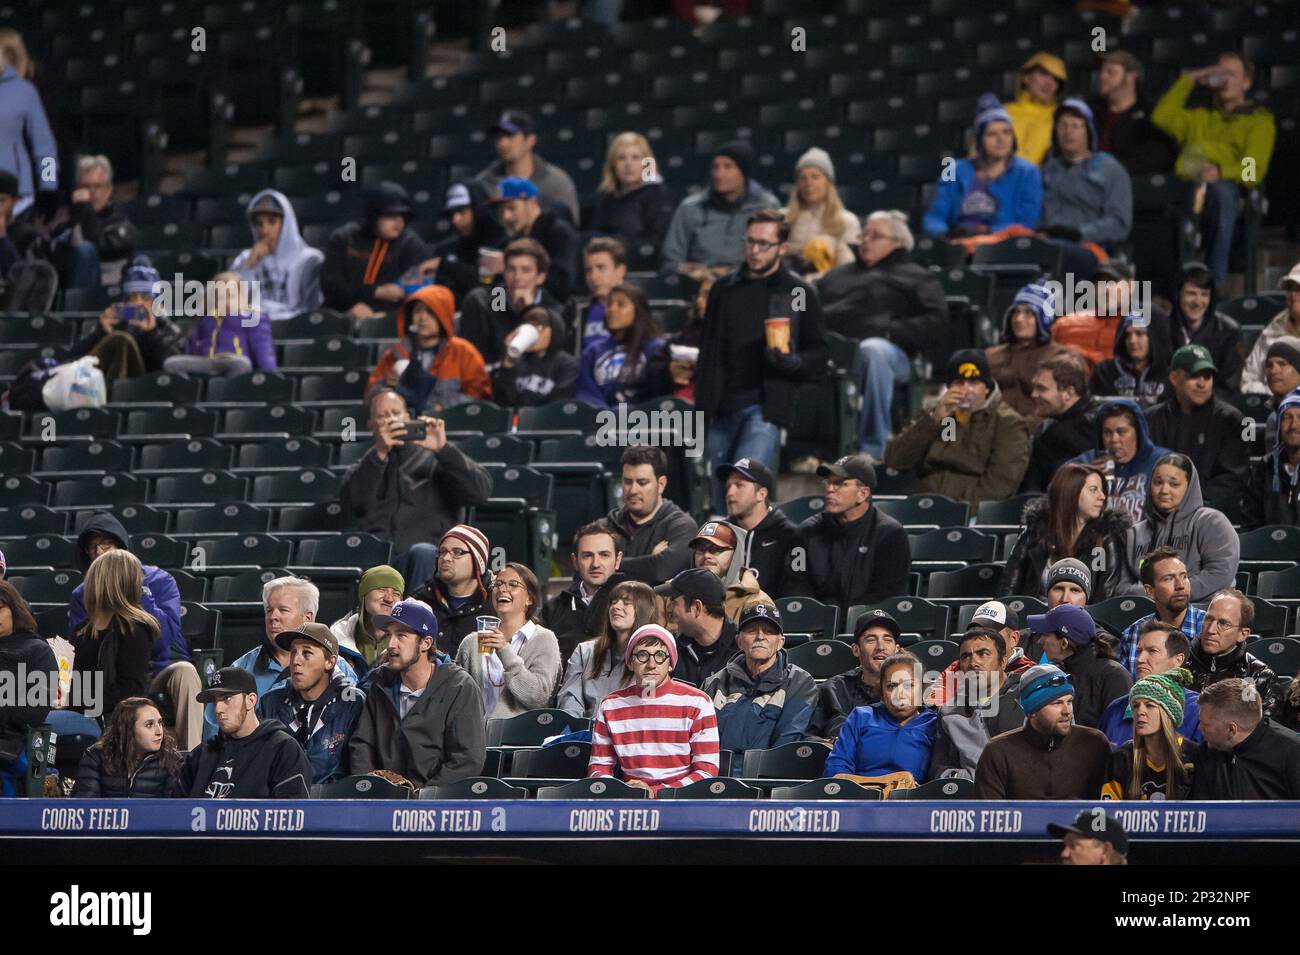 20 APRIL 2015 A fan dressed up as Waldo takes in the game from the first row behind the home team dugout during a regular season Major League Baseball game between the